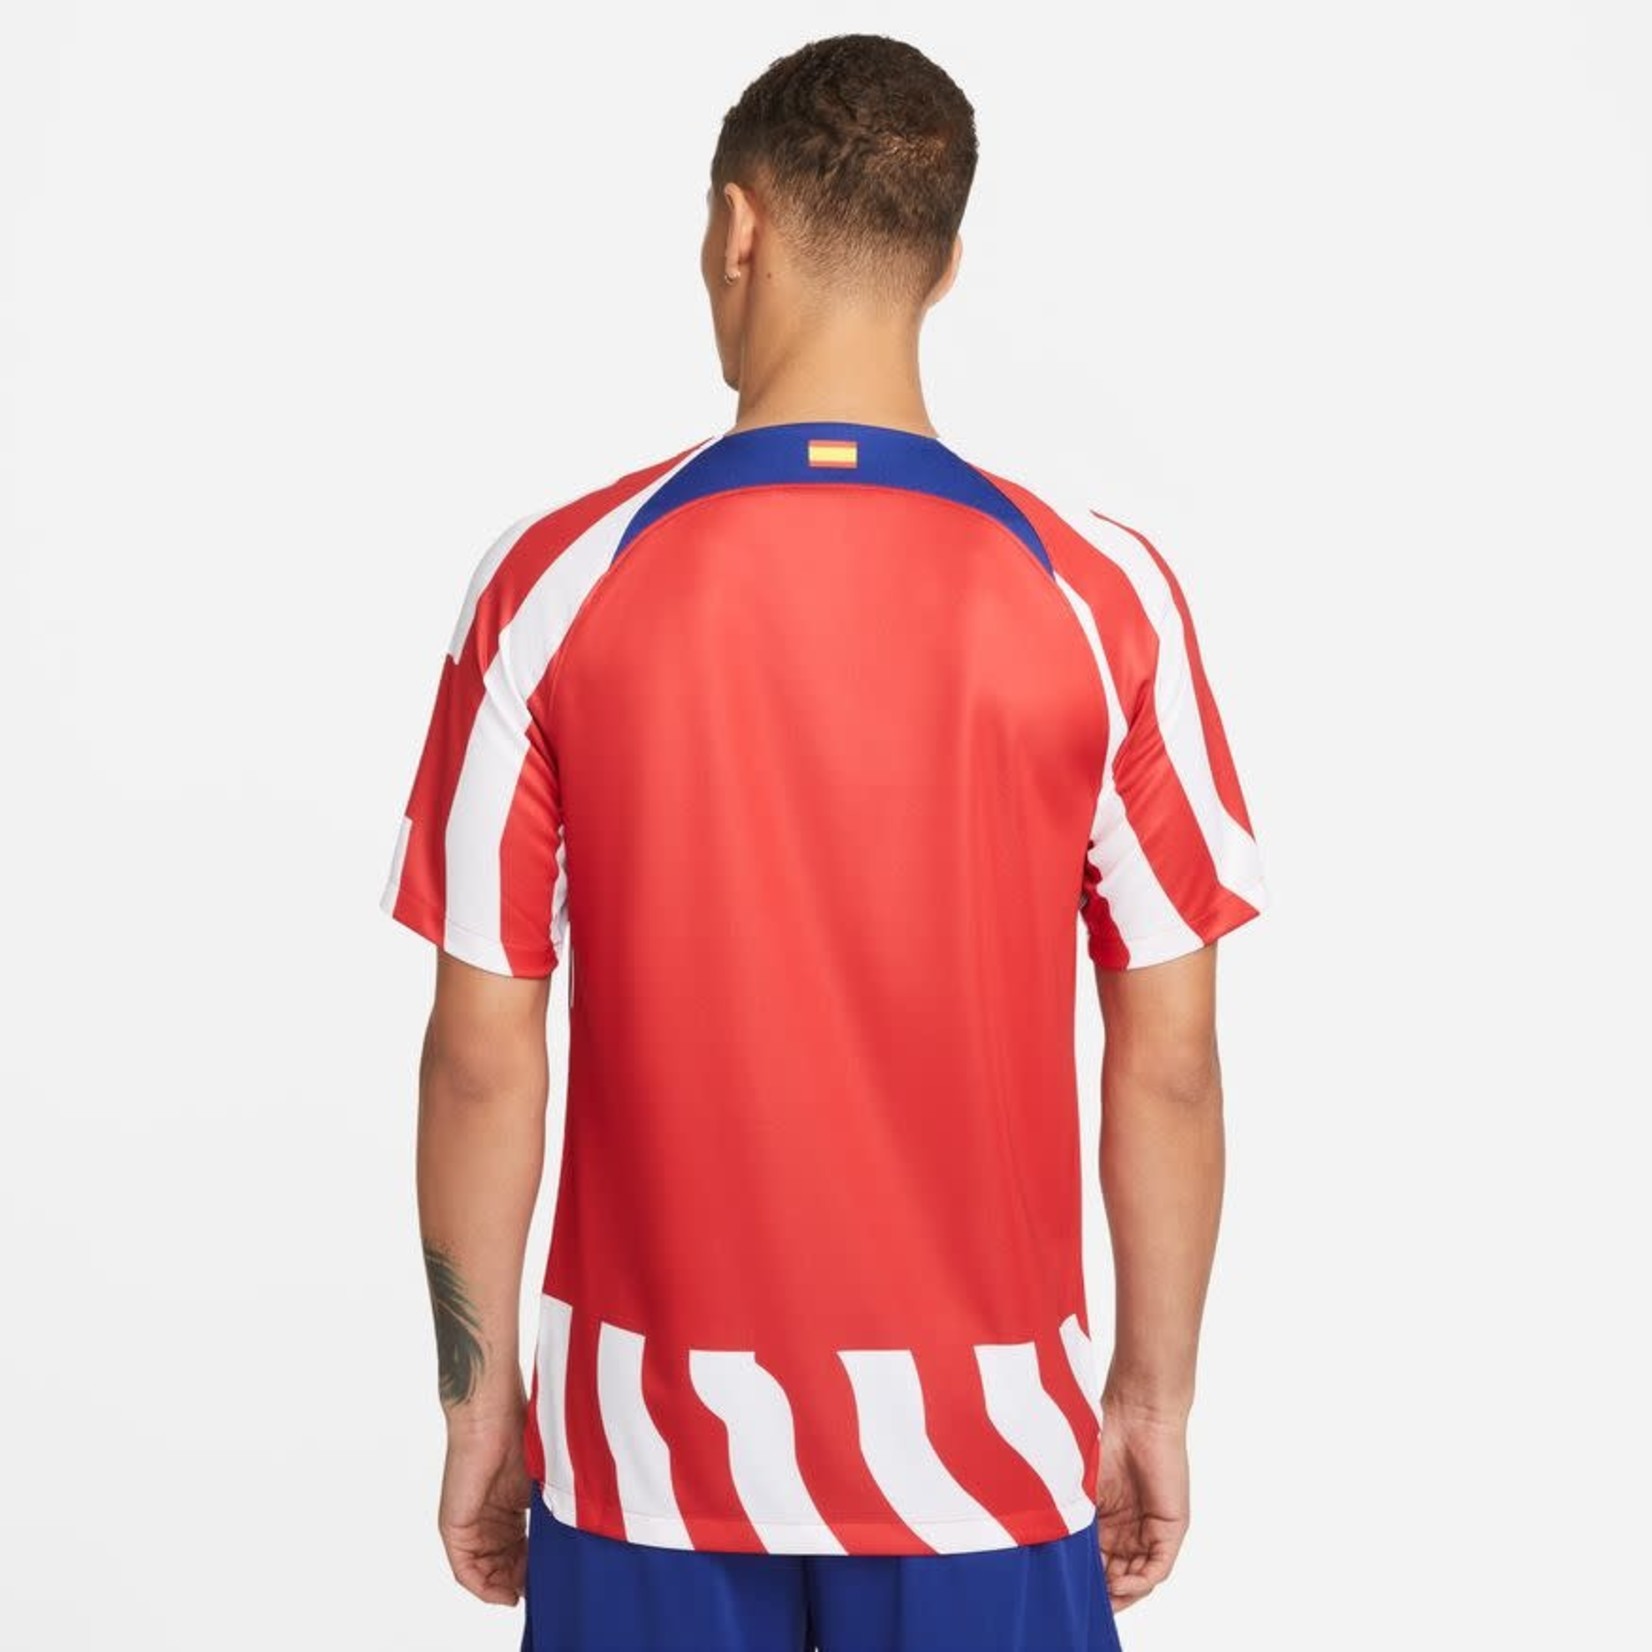 atletico madrid jersey new